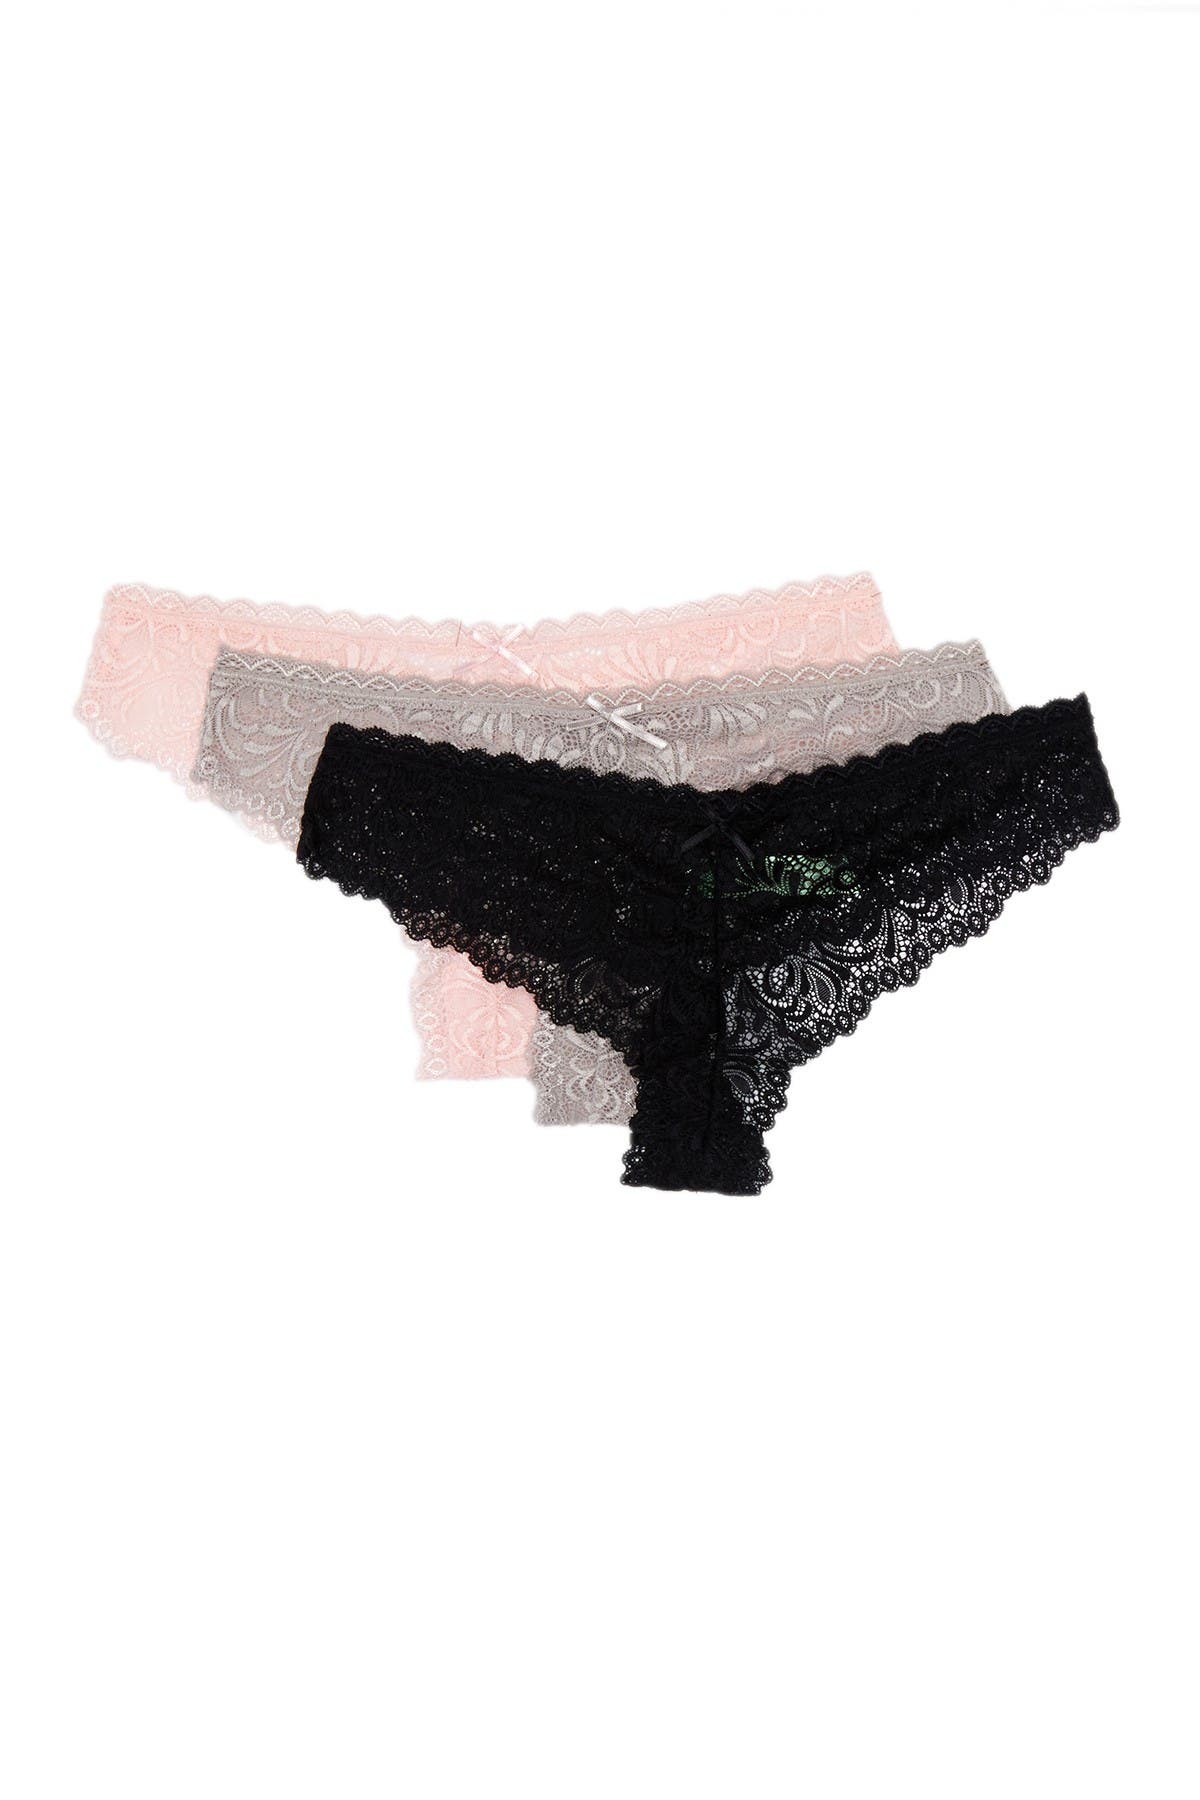 Honeydew Intimates Lace Brief Cut Thong In Open Miscellaneous